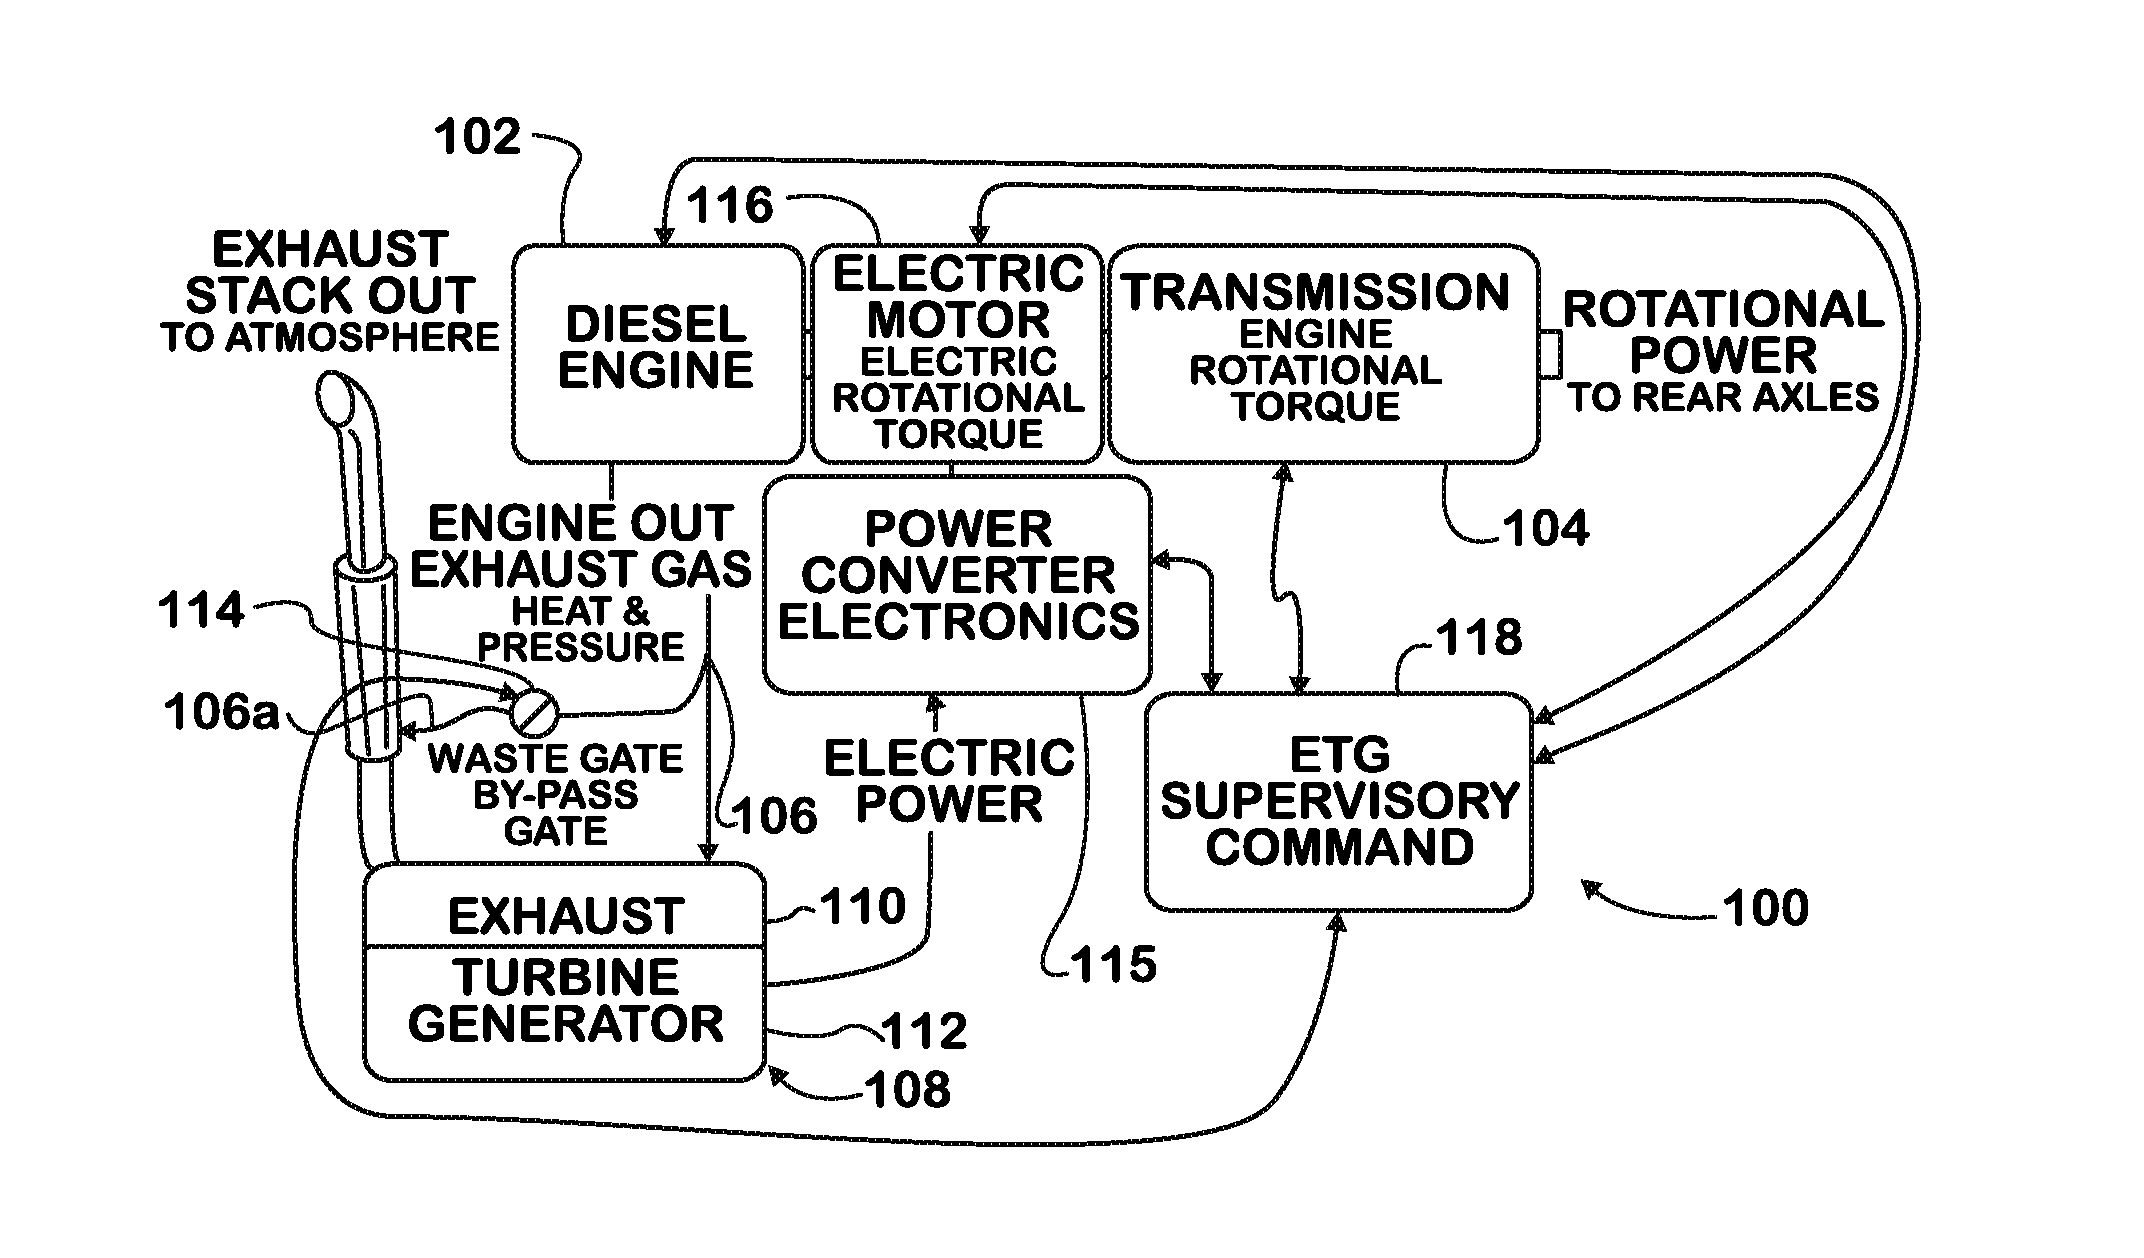 System and method for exporting a vehicle on-board ac power to a second vehicle